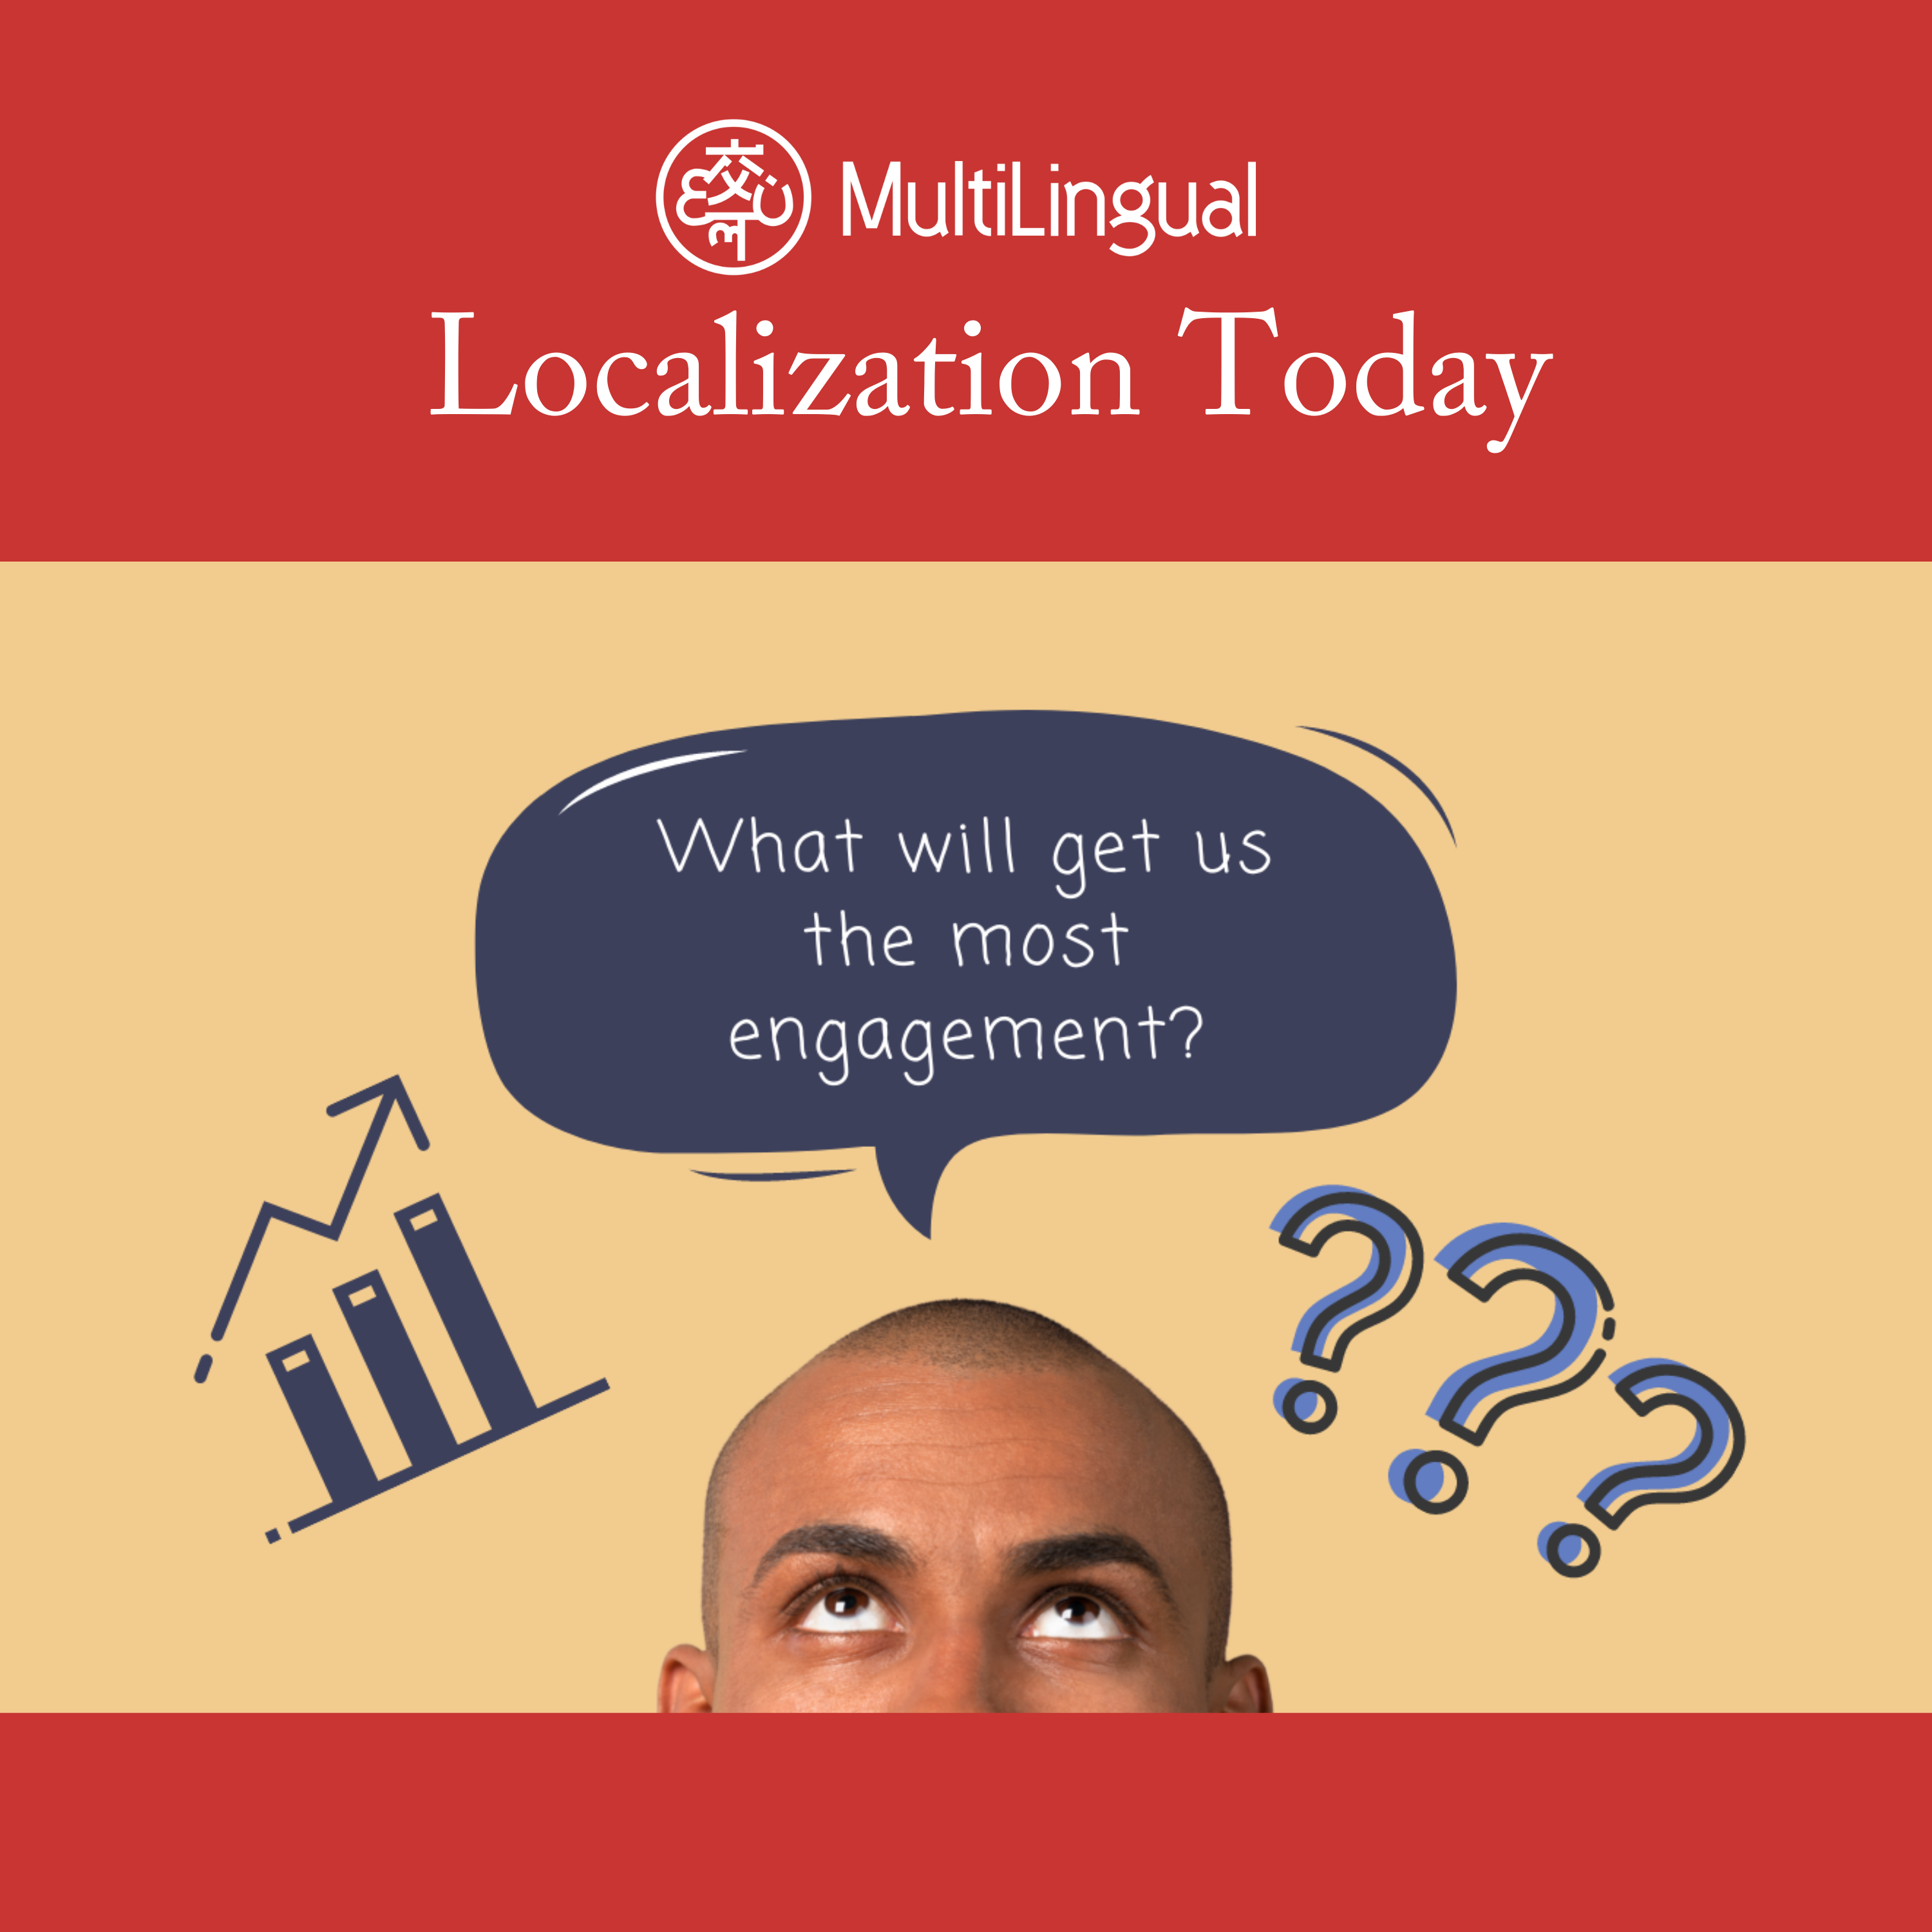 Looking to engage localization clients? Take a cue from social media!